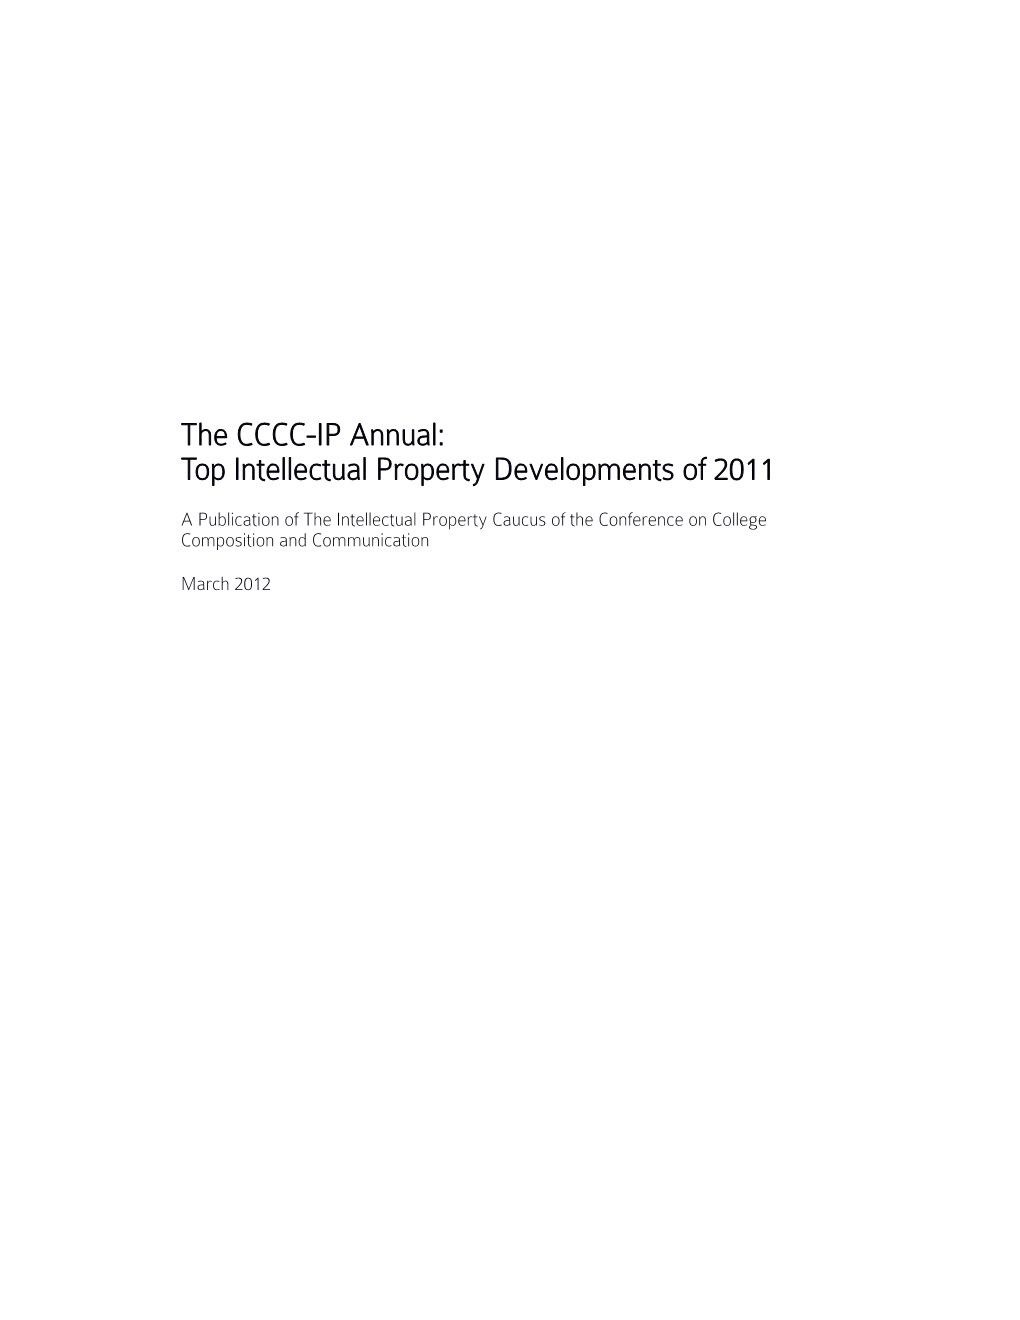 The CCCC-IP Annual: Top Intellectual Property Developments of 2011